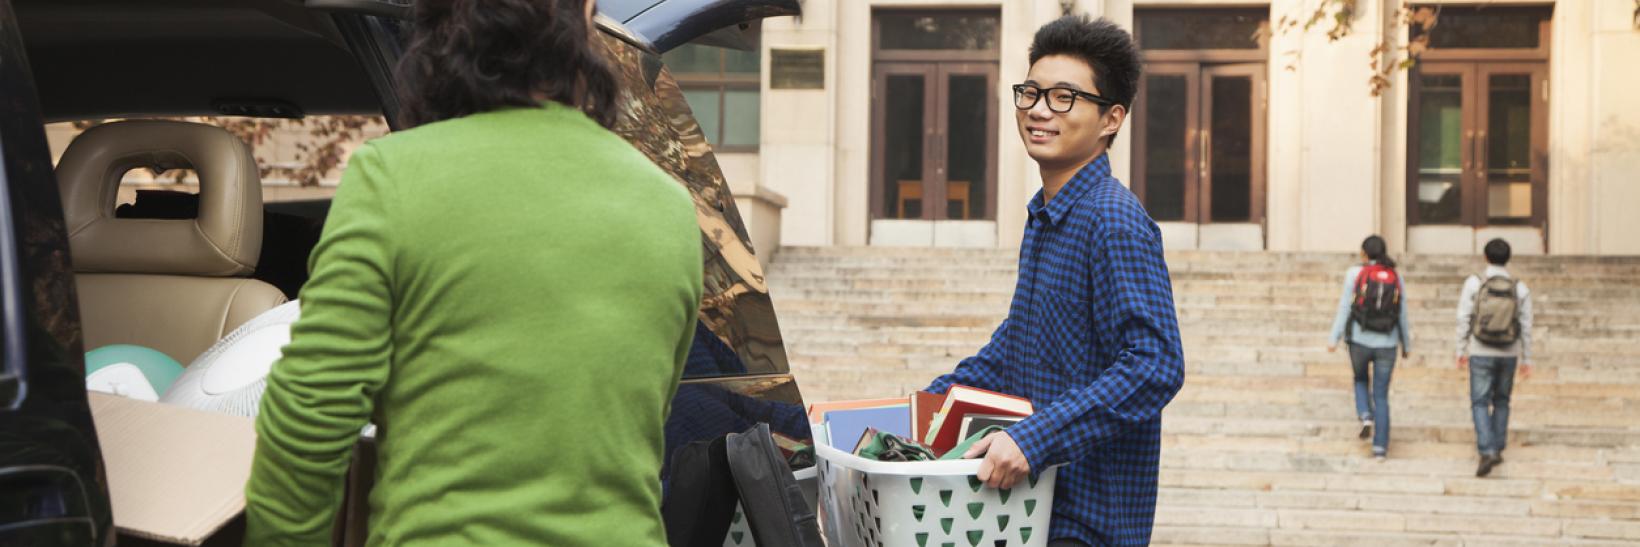 A Young man moving into a dormitory on a college campus.